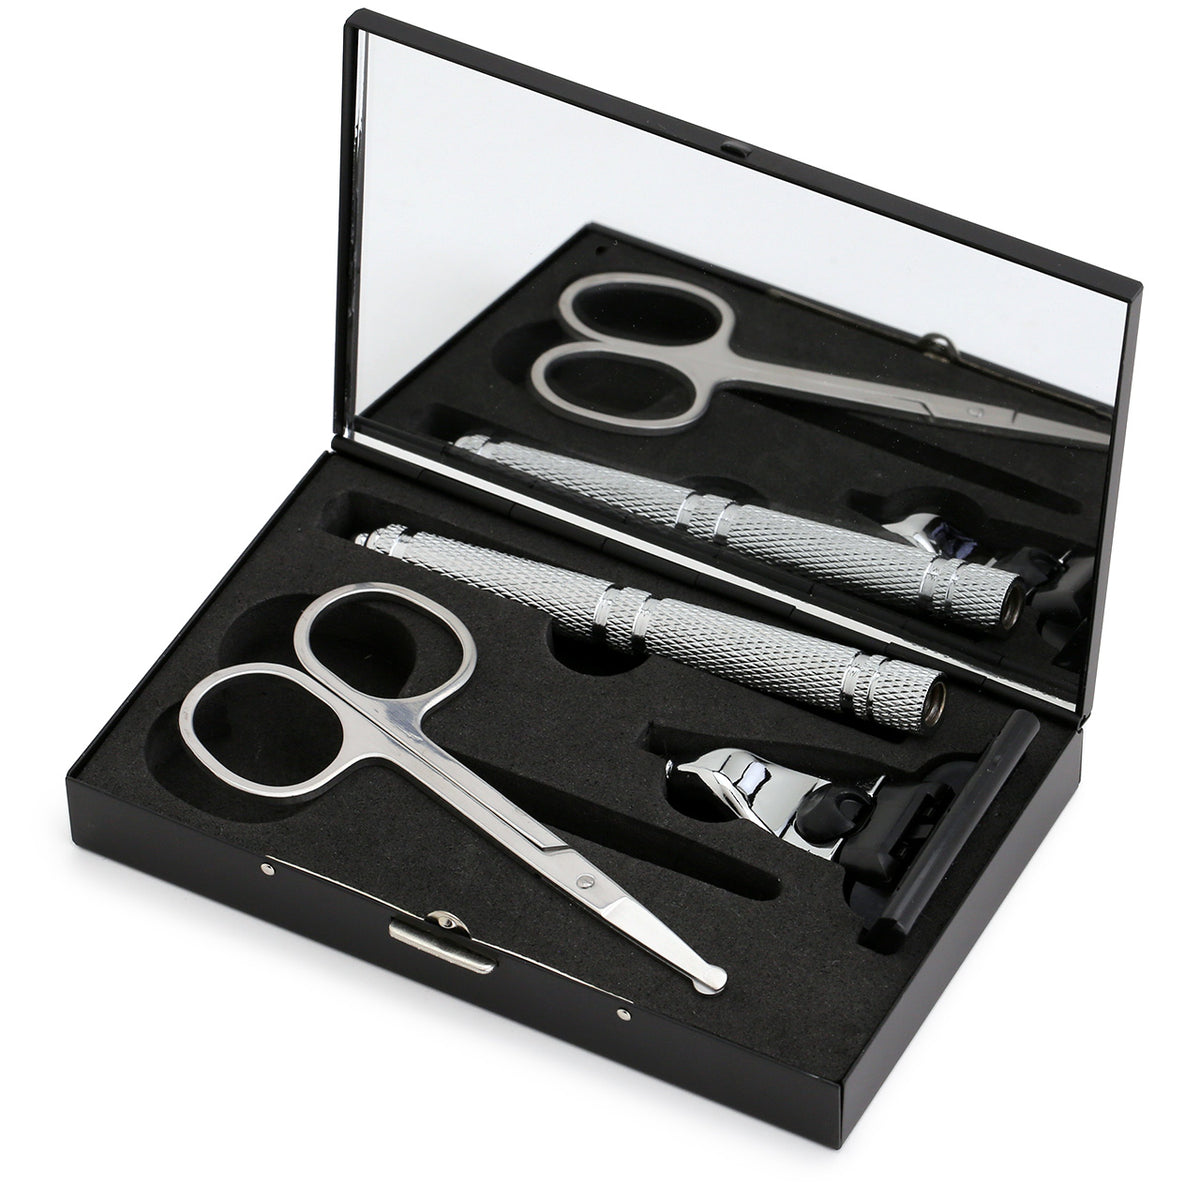 Izola travel set with cartridge razor, blunt-nosed scissors shown deconstructed on the open case with a mirror inside the lid